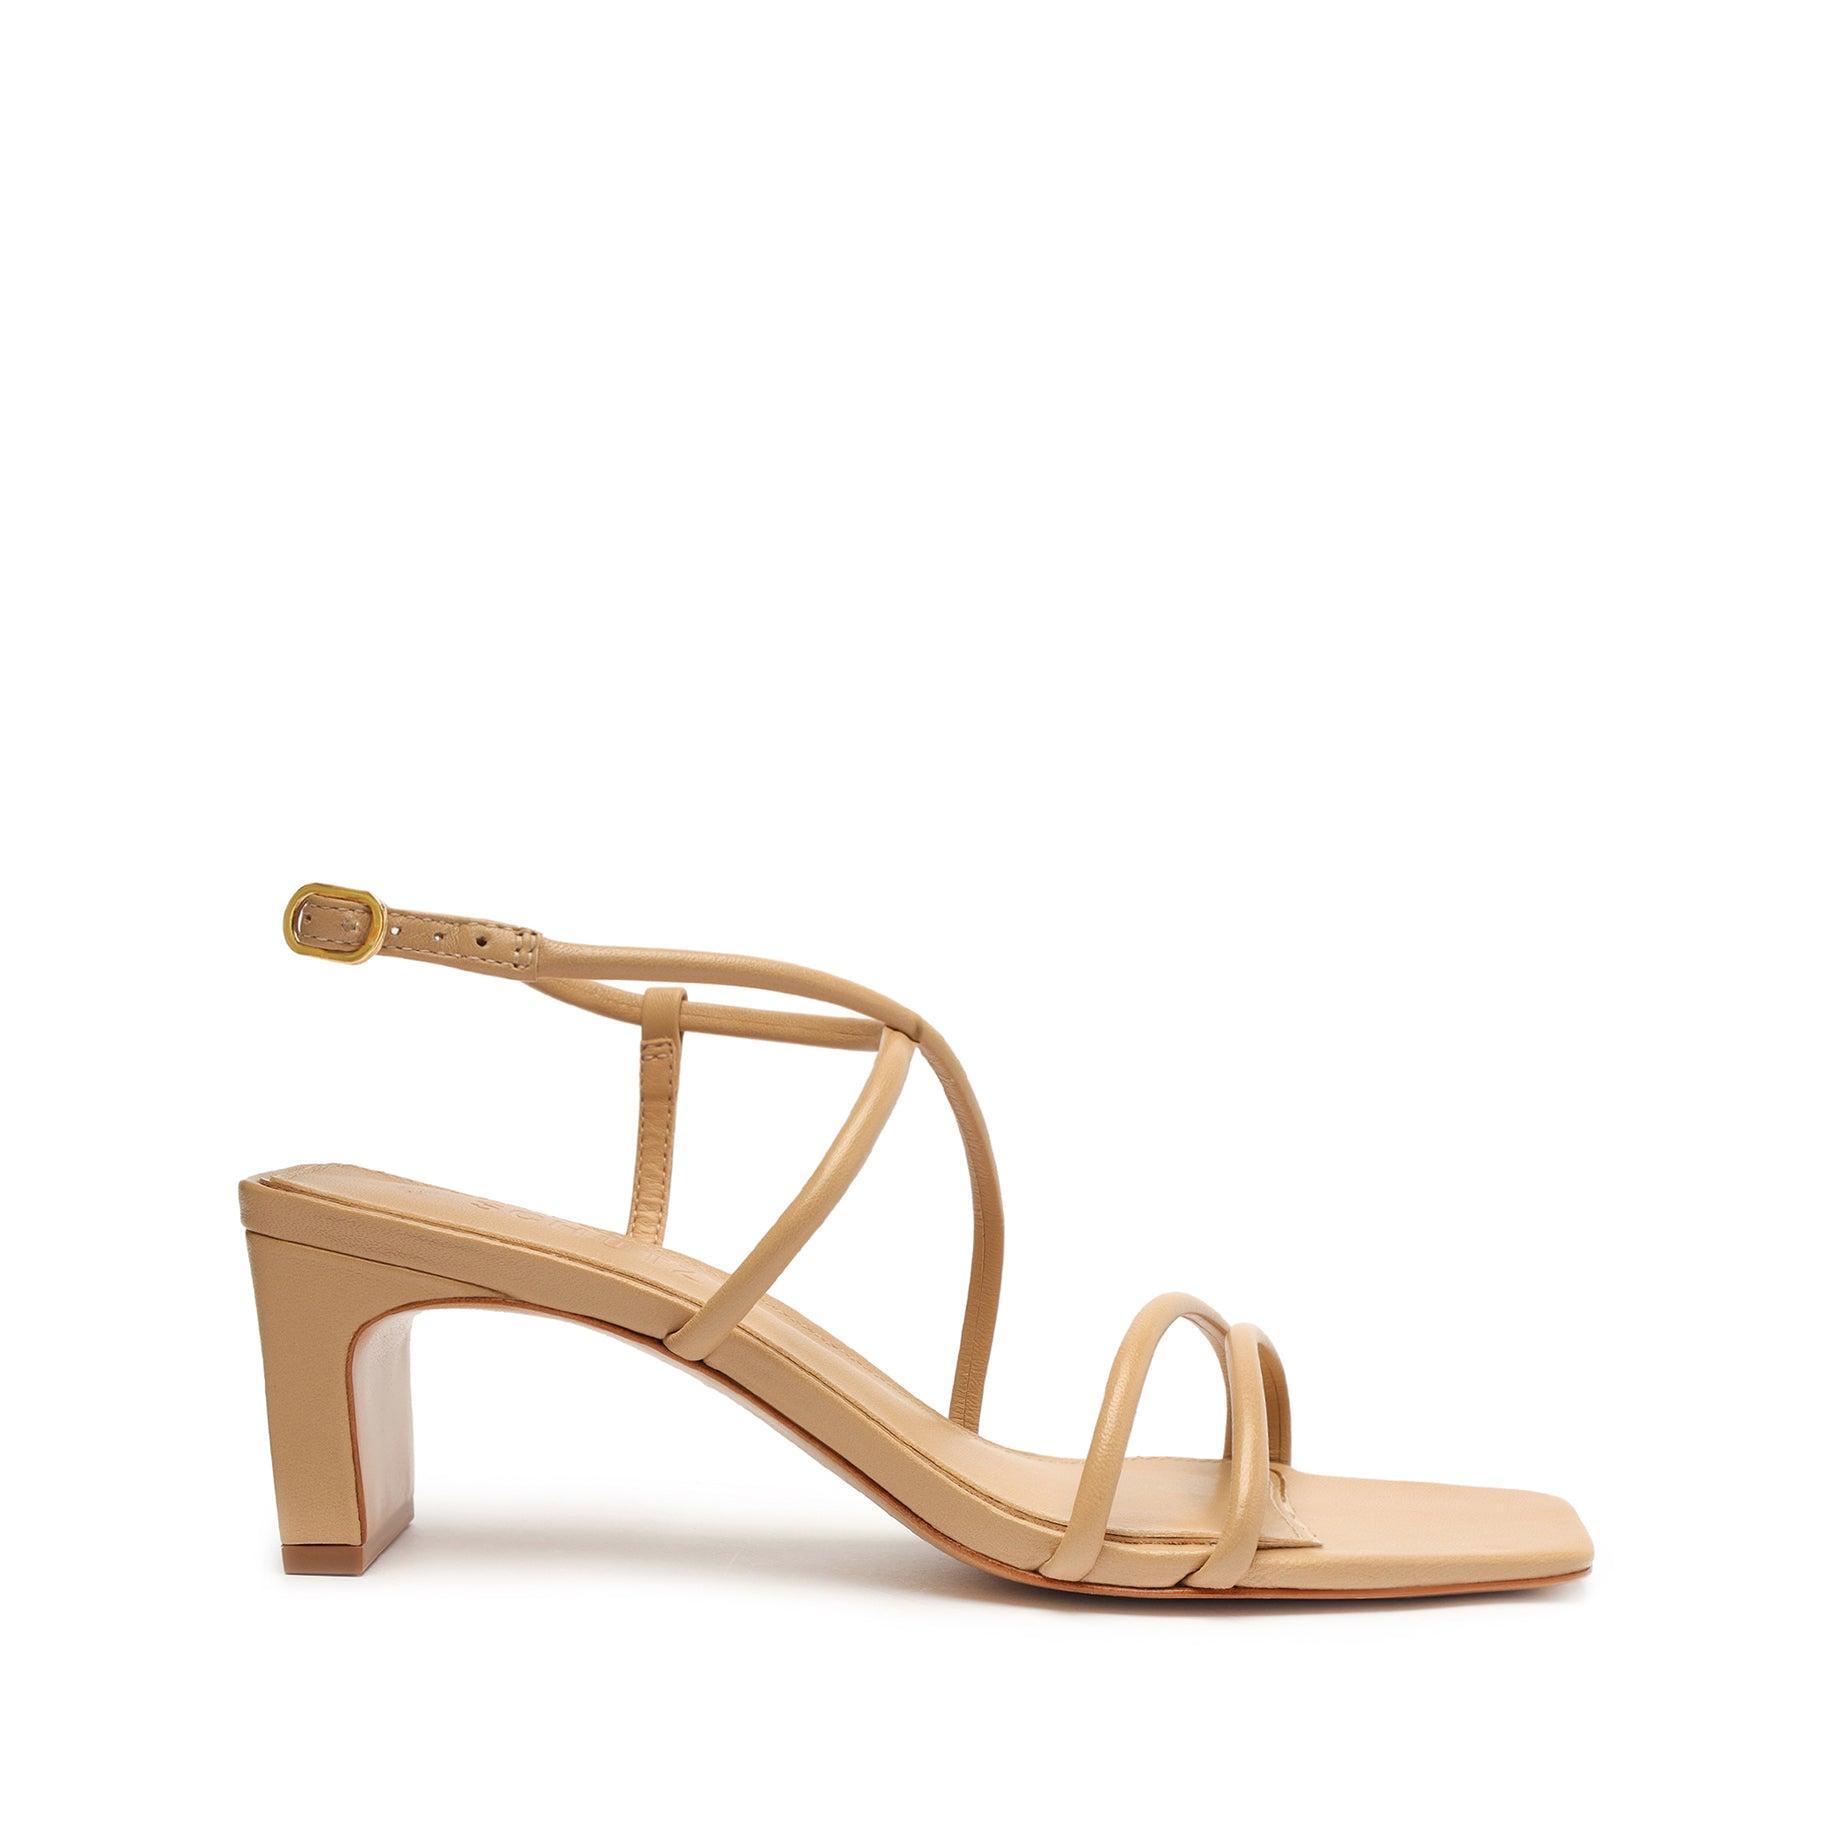 Schutz Aimee Block Sandal in Nude. - size 6.5 (also in 6, 7, 7.5, 8, 8.5, 9, 9.5, 10) Product Image